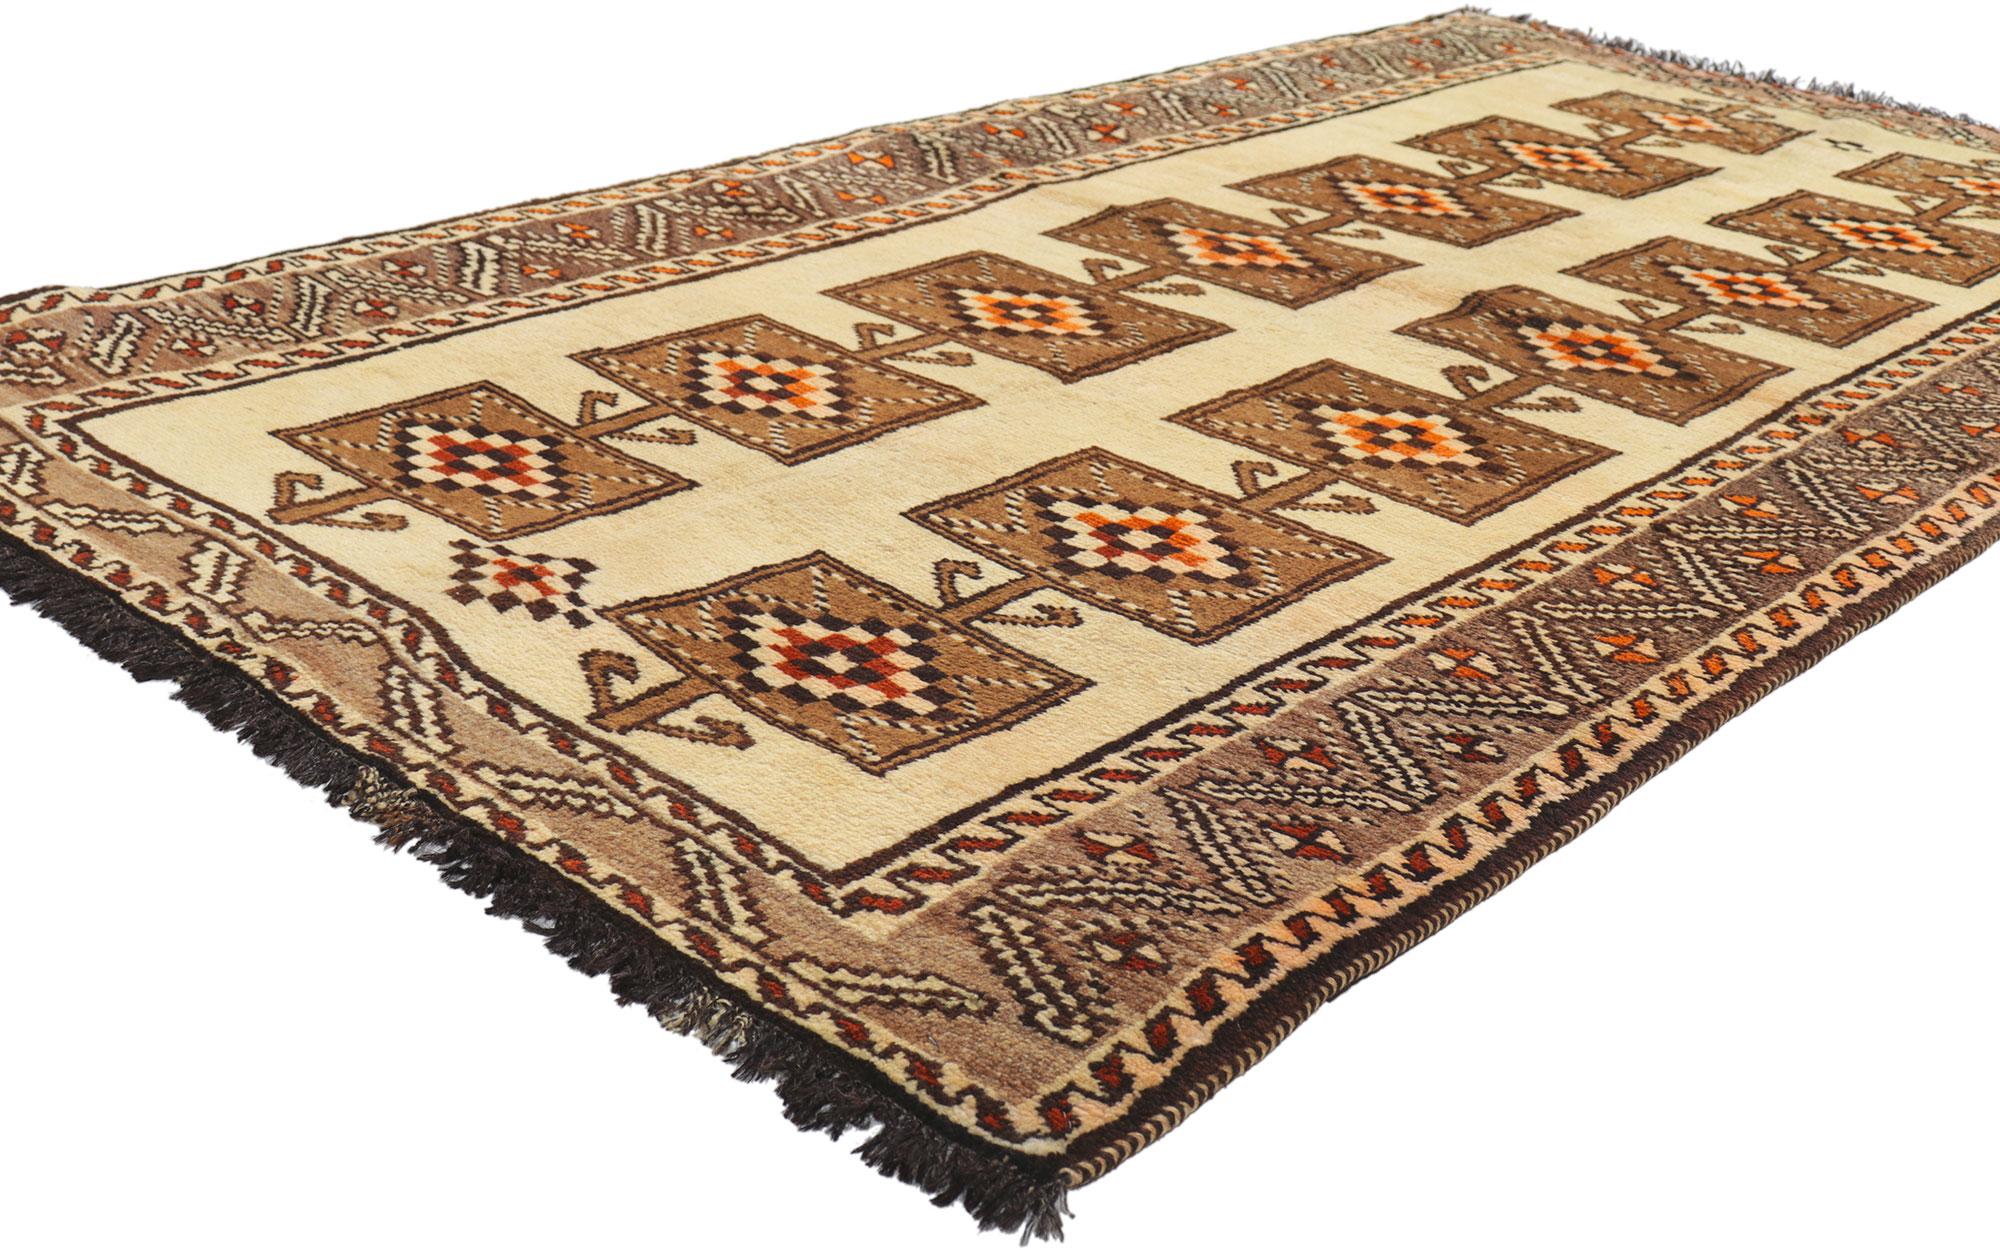 76548 Vintage Persian Shiraz Rug, 03'09 X 07'01. 
Emanating nomadic charm with incredible detail and texture, this hand knotted wool vintage Persian Shiraz rug is a captivating vision of woven beauty. The tribal design and earthy colorway woven